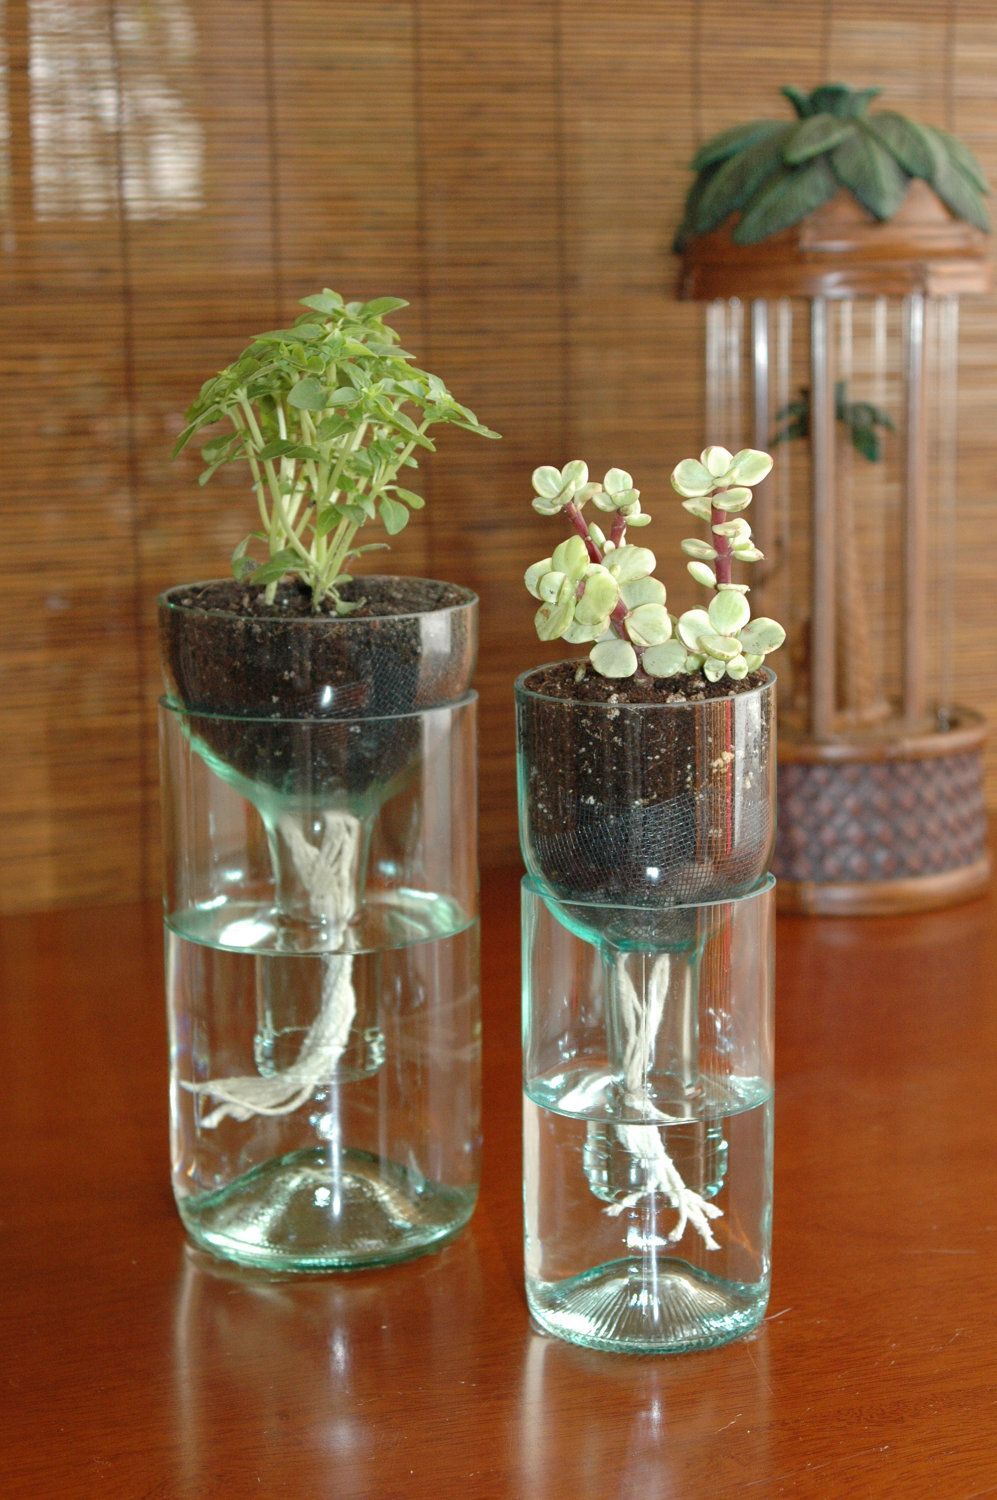 Self watering planter made from recycled wine bottle.